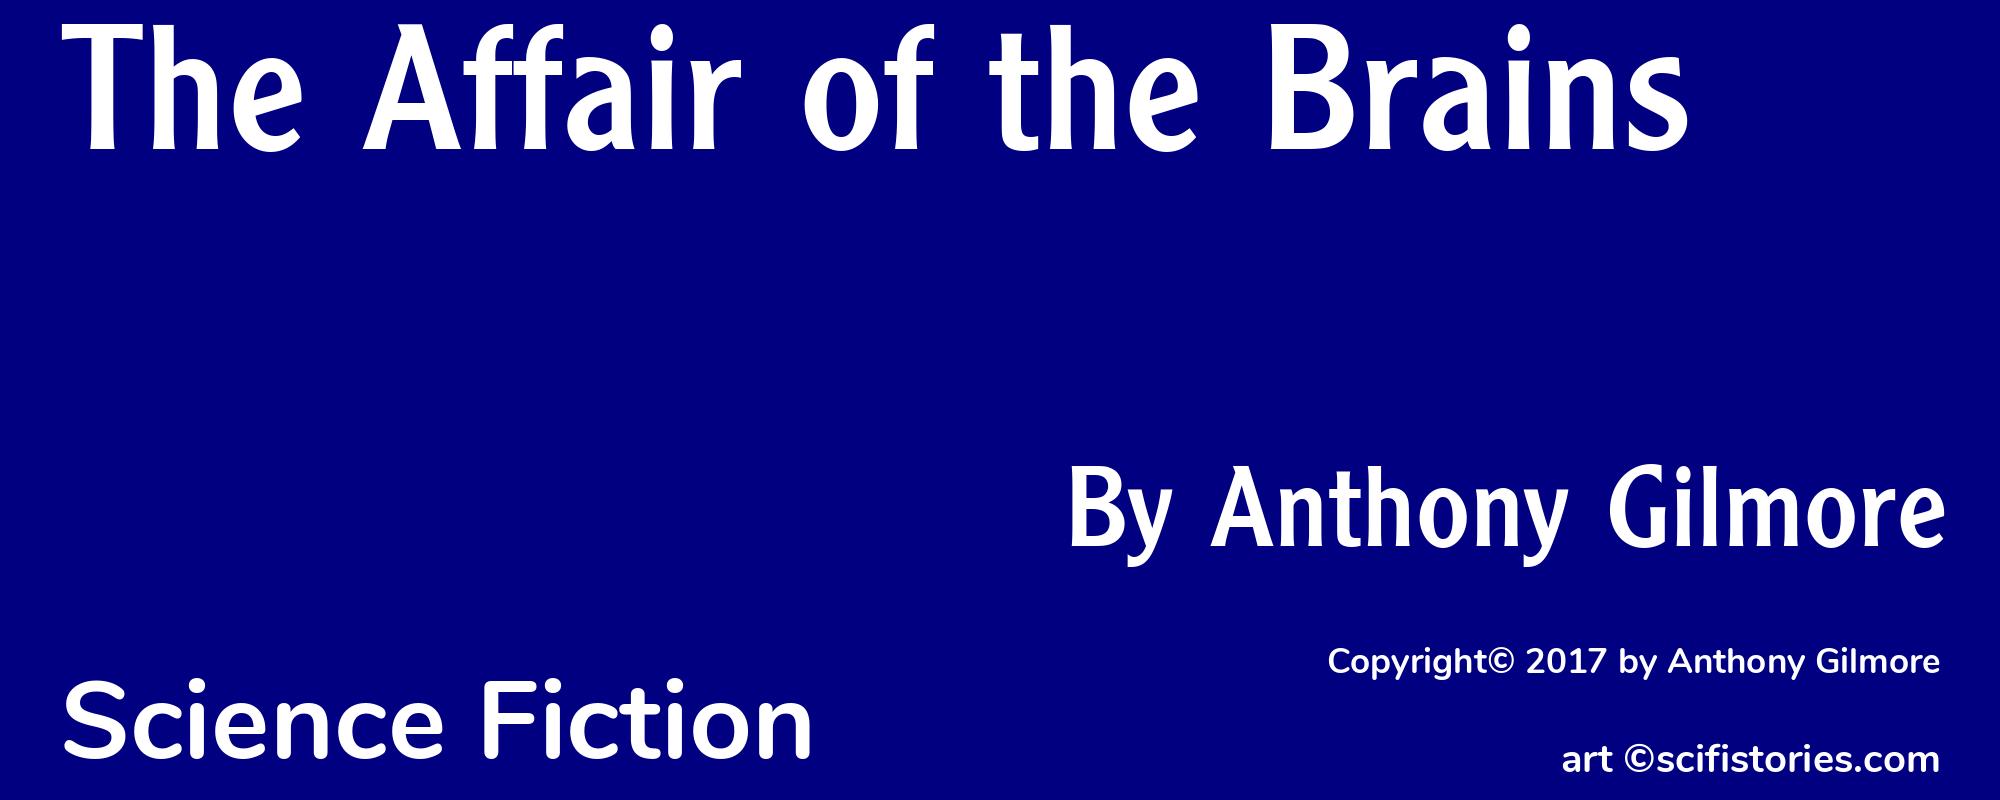 The Affair of the Brains - Cover